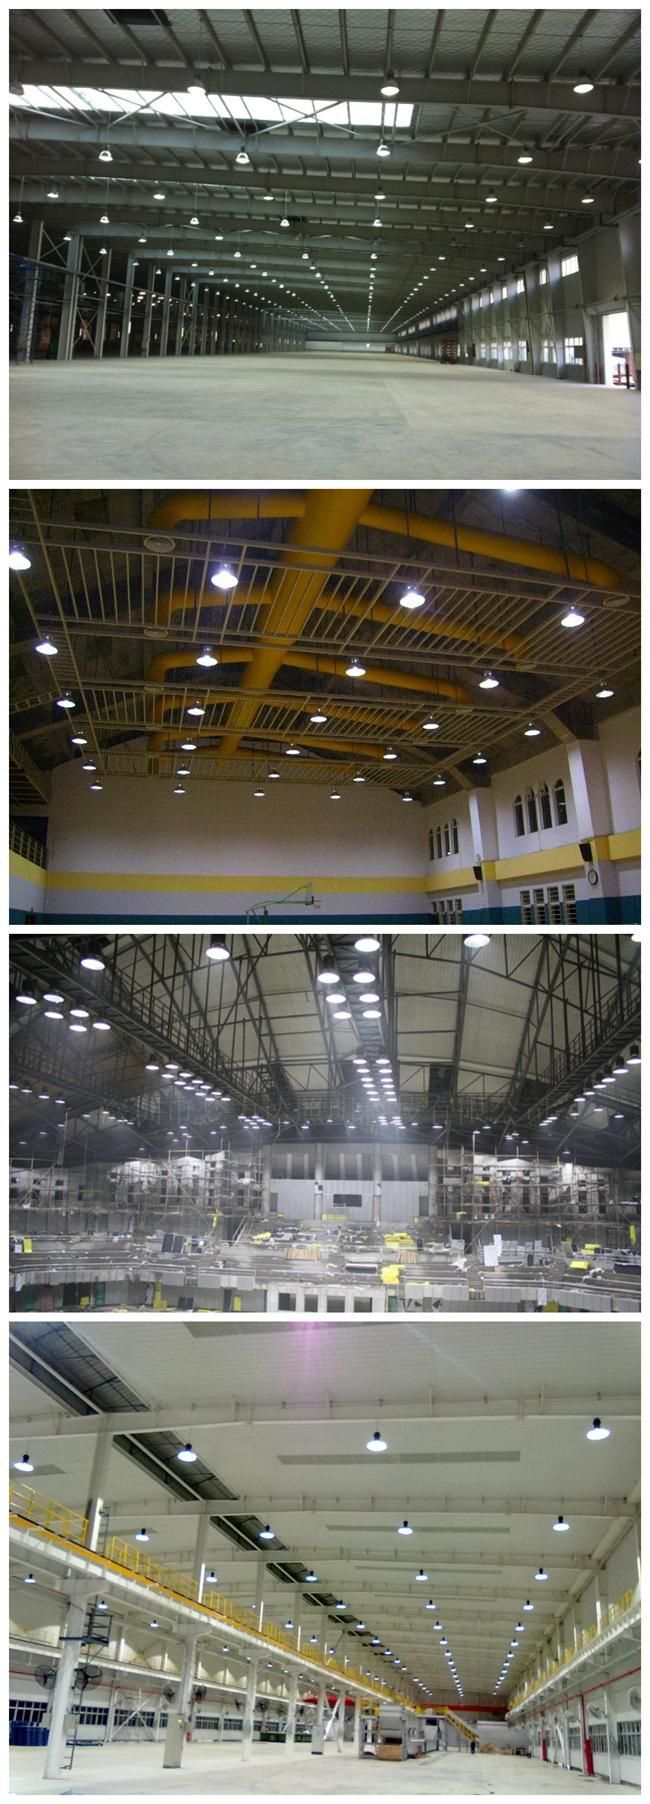 200W LED High Bay Lamp for Warehouse with Ce and RoHS